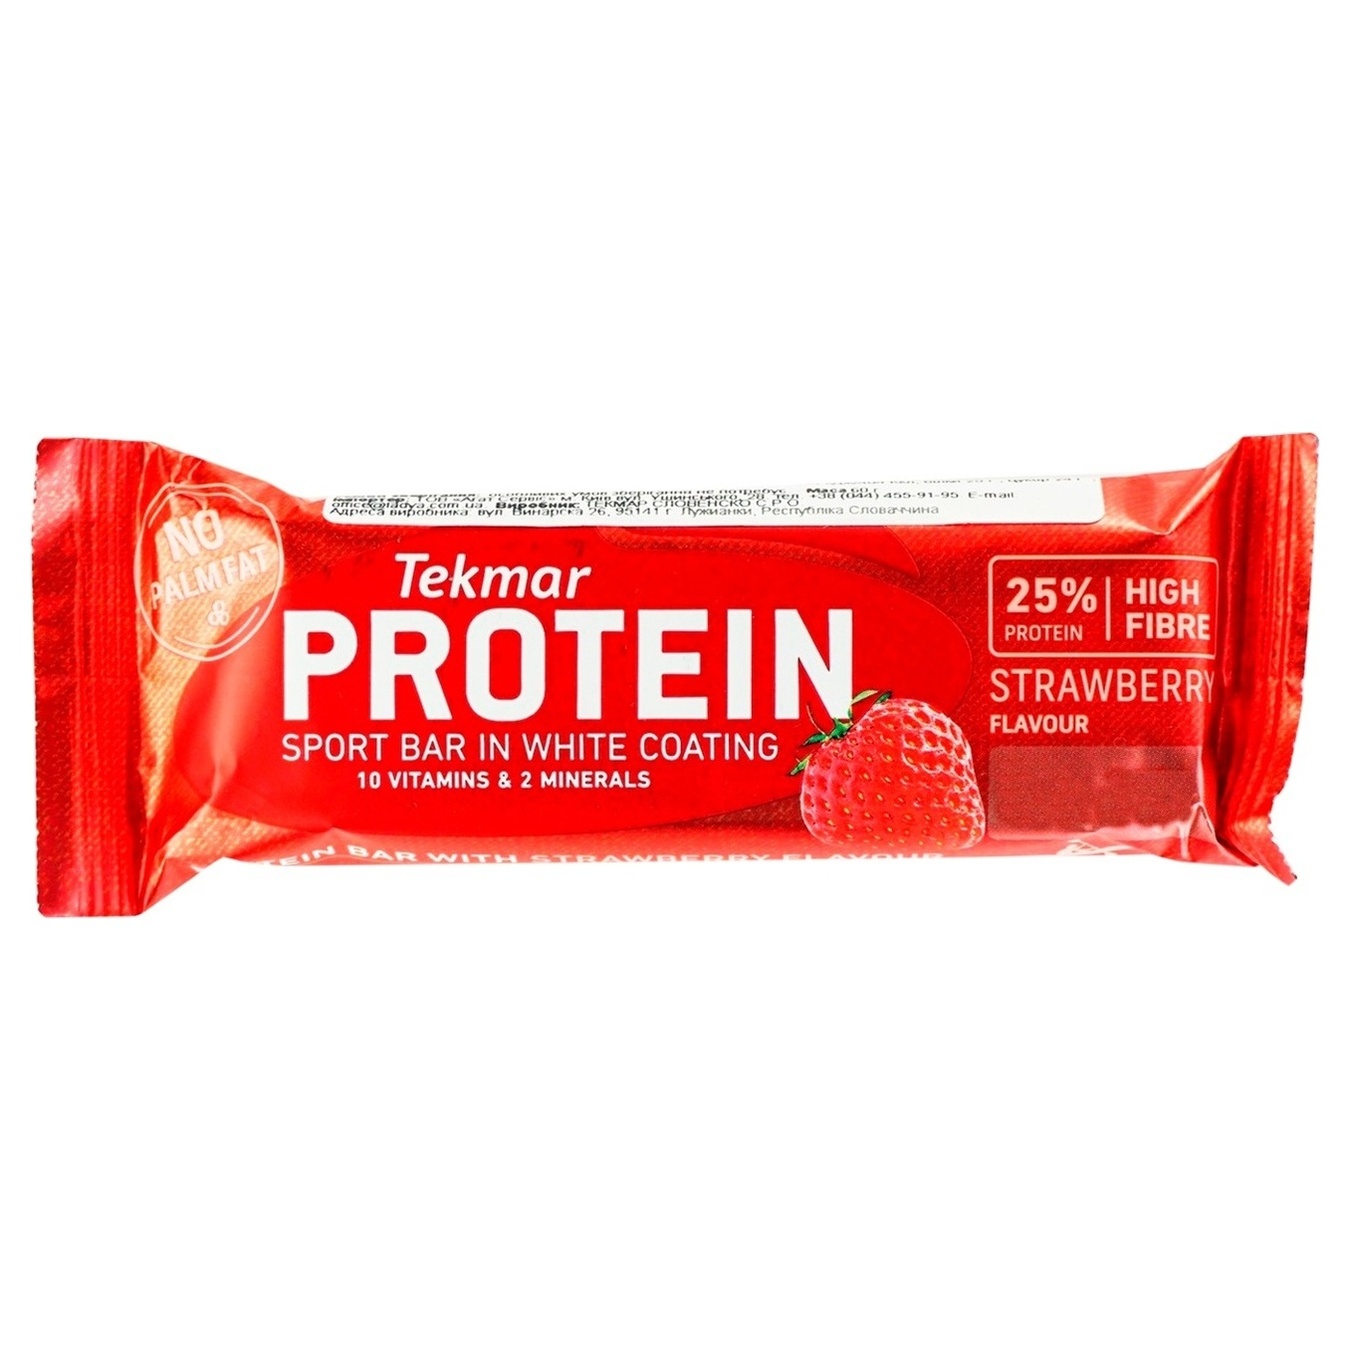 Tekmar protein bar with strawberries 60g